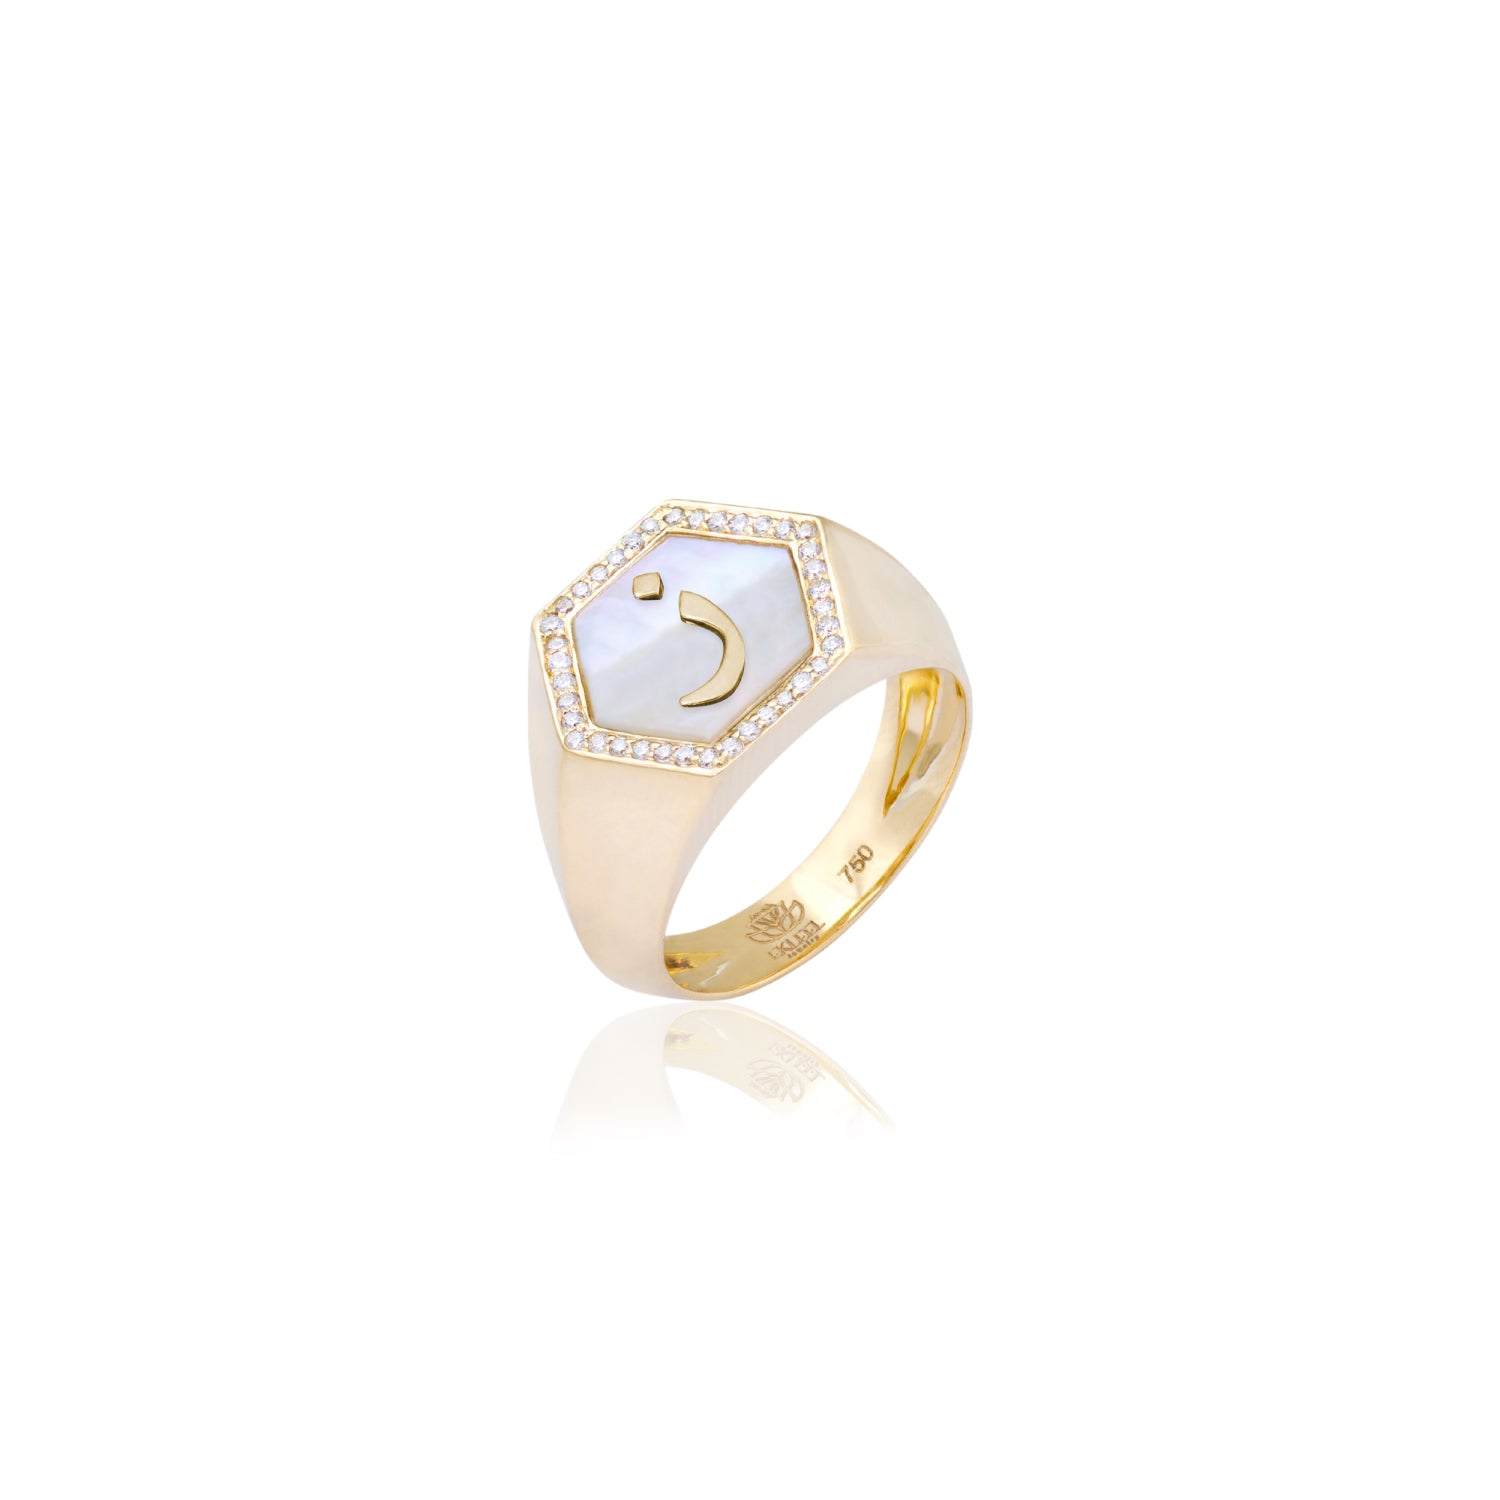 Qamoos 2.0 Letter ز White Mother of Pearl and Diamond Signet Ring in Yellow Gold